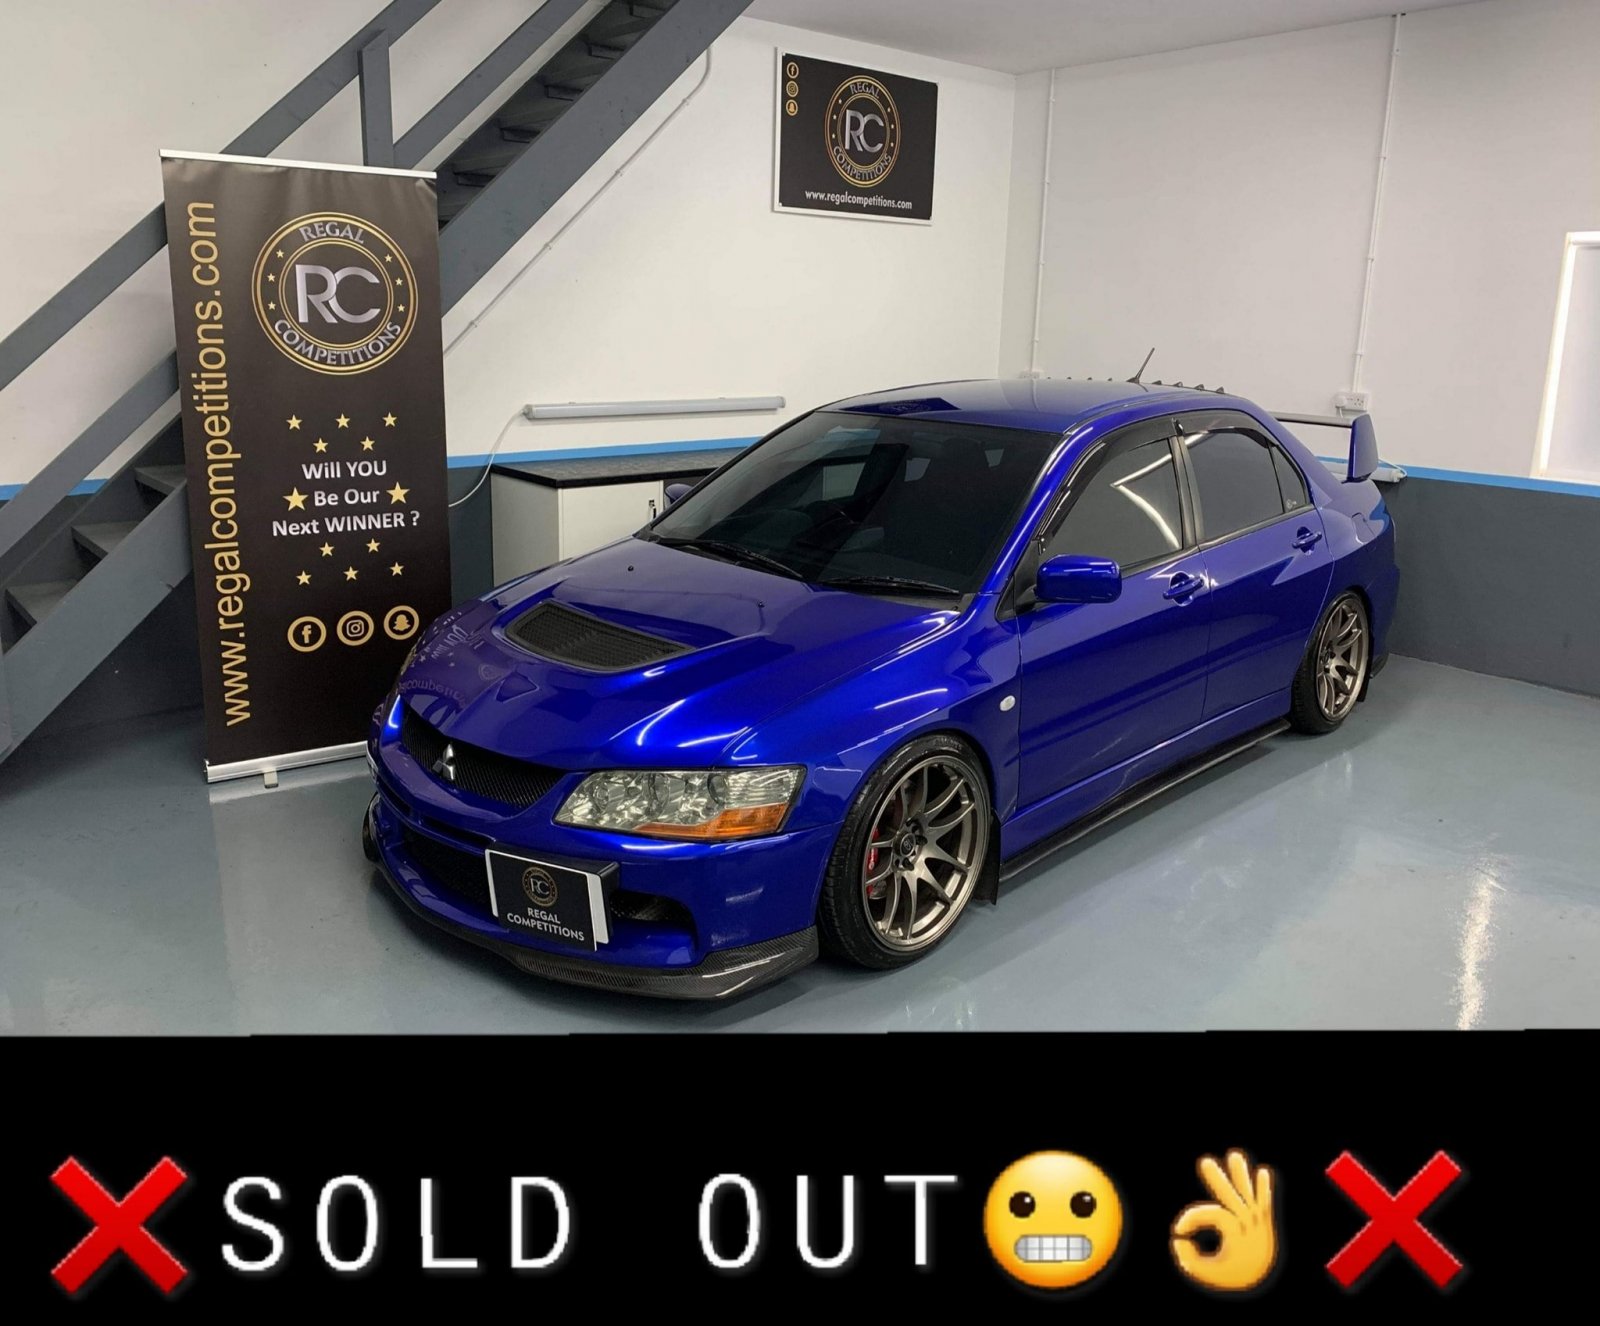 sold out.jpg